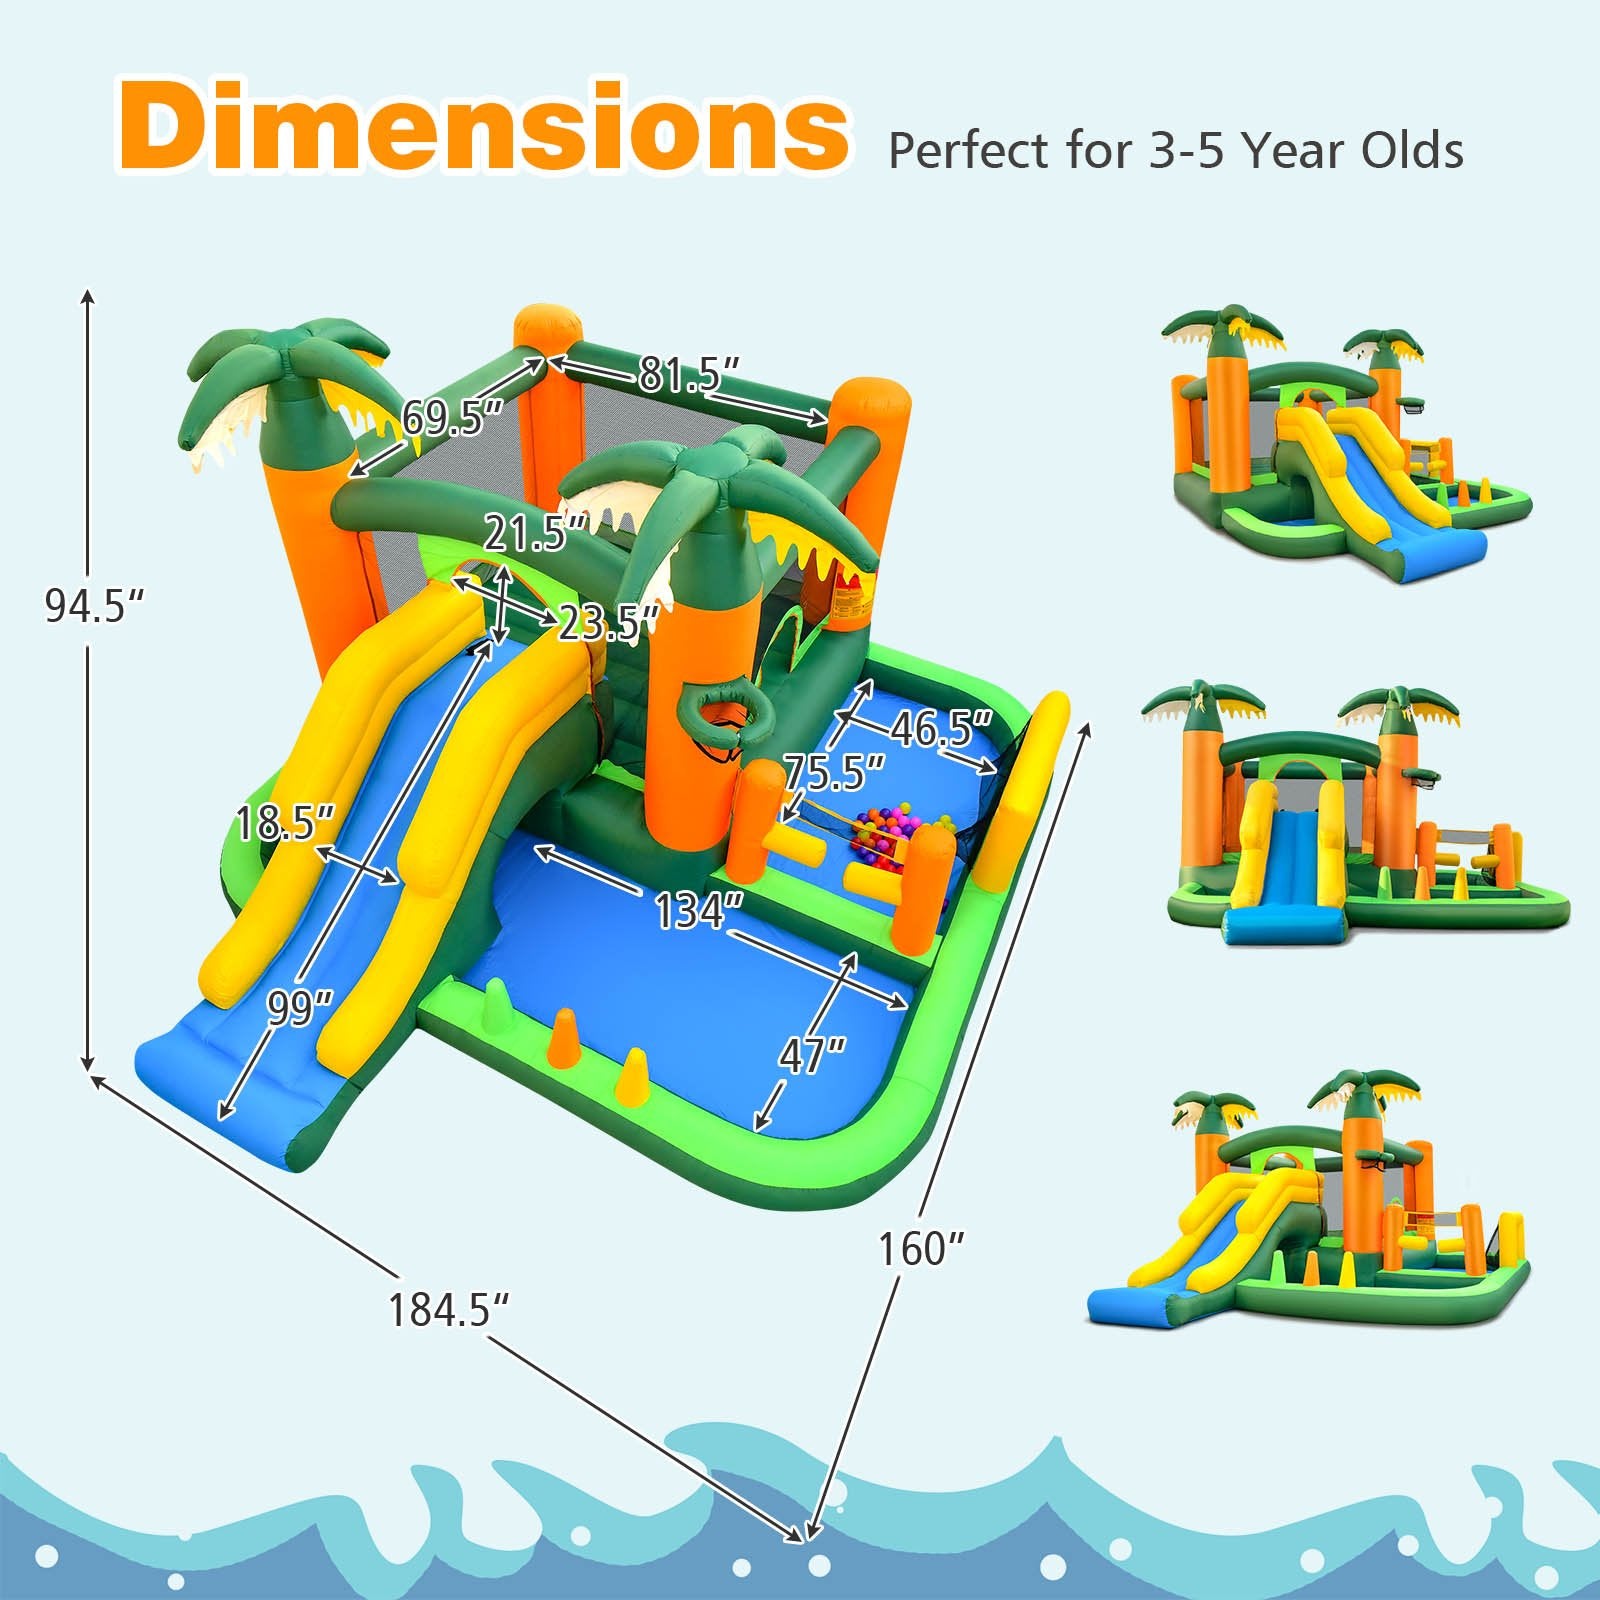 8-in-1 Tropical Inflatable Bounce Castle with 2 Ball Pits Slide and Tunnel Without Blower - Gallery Canada